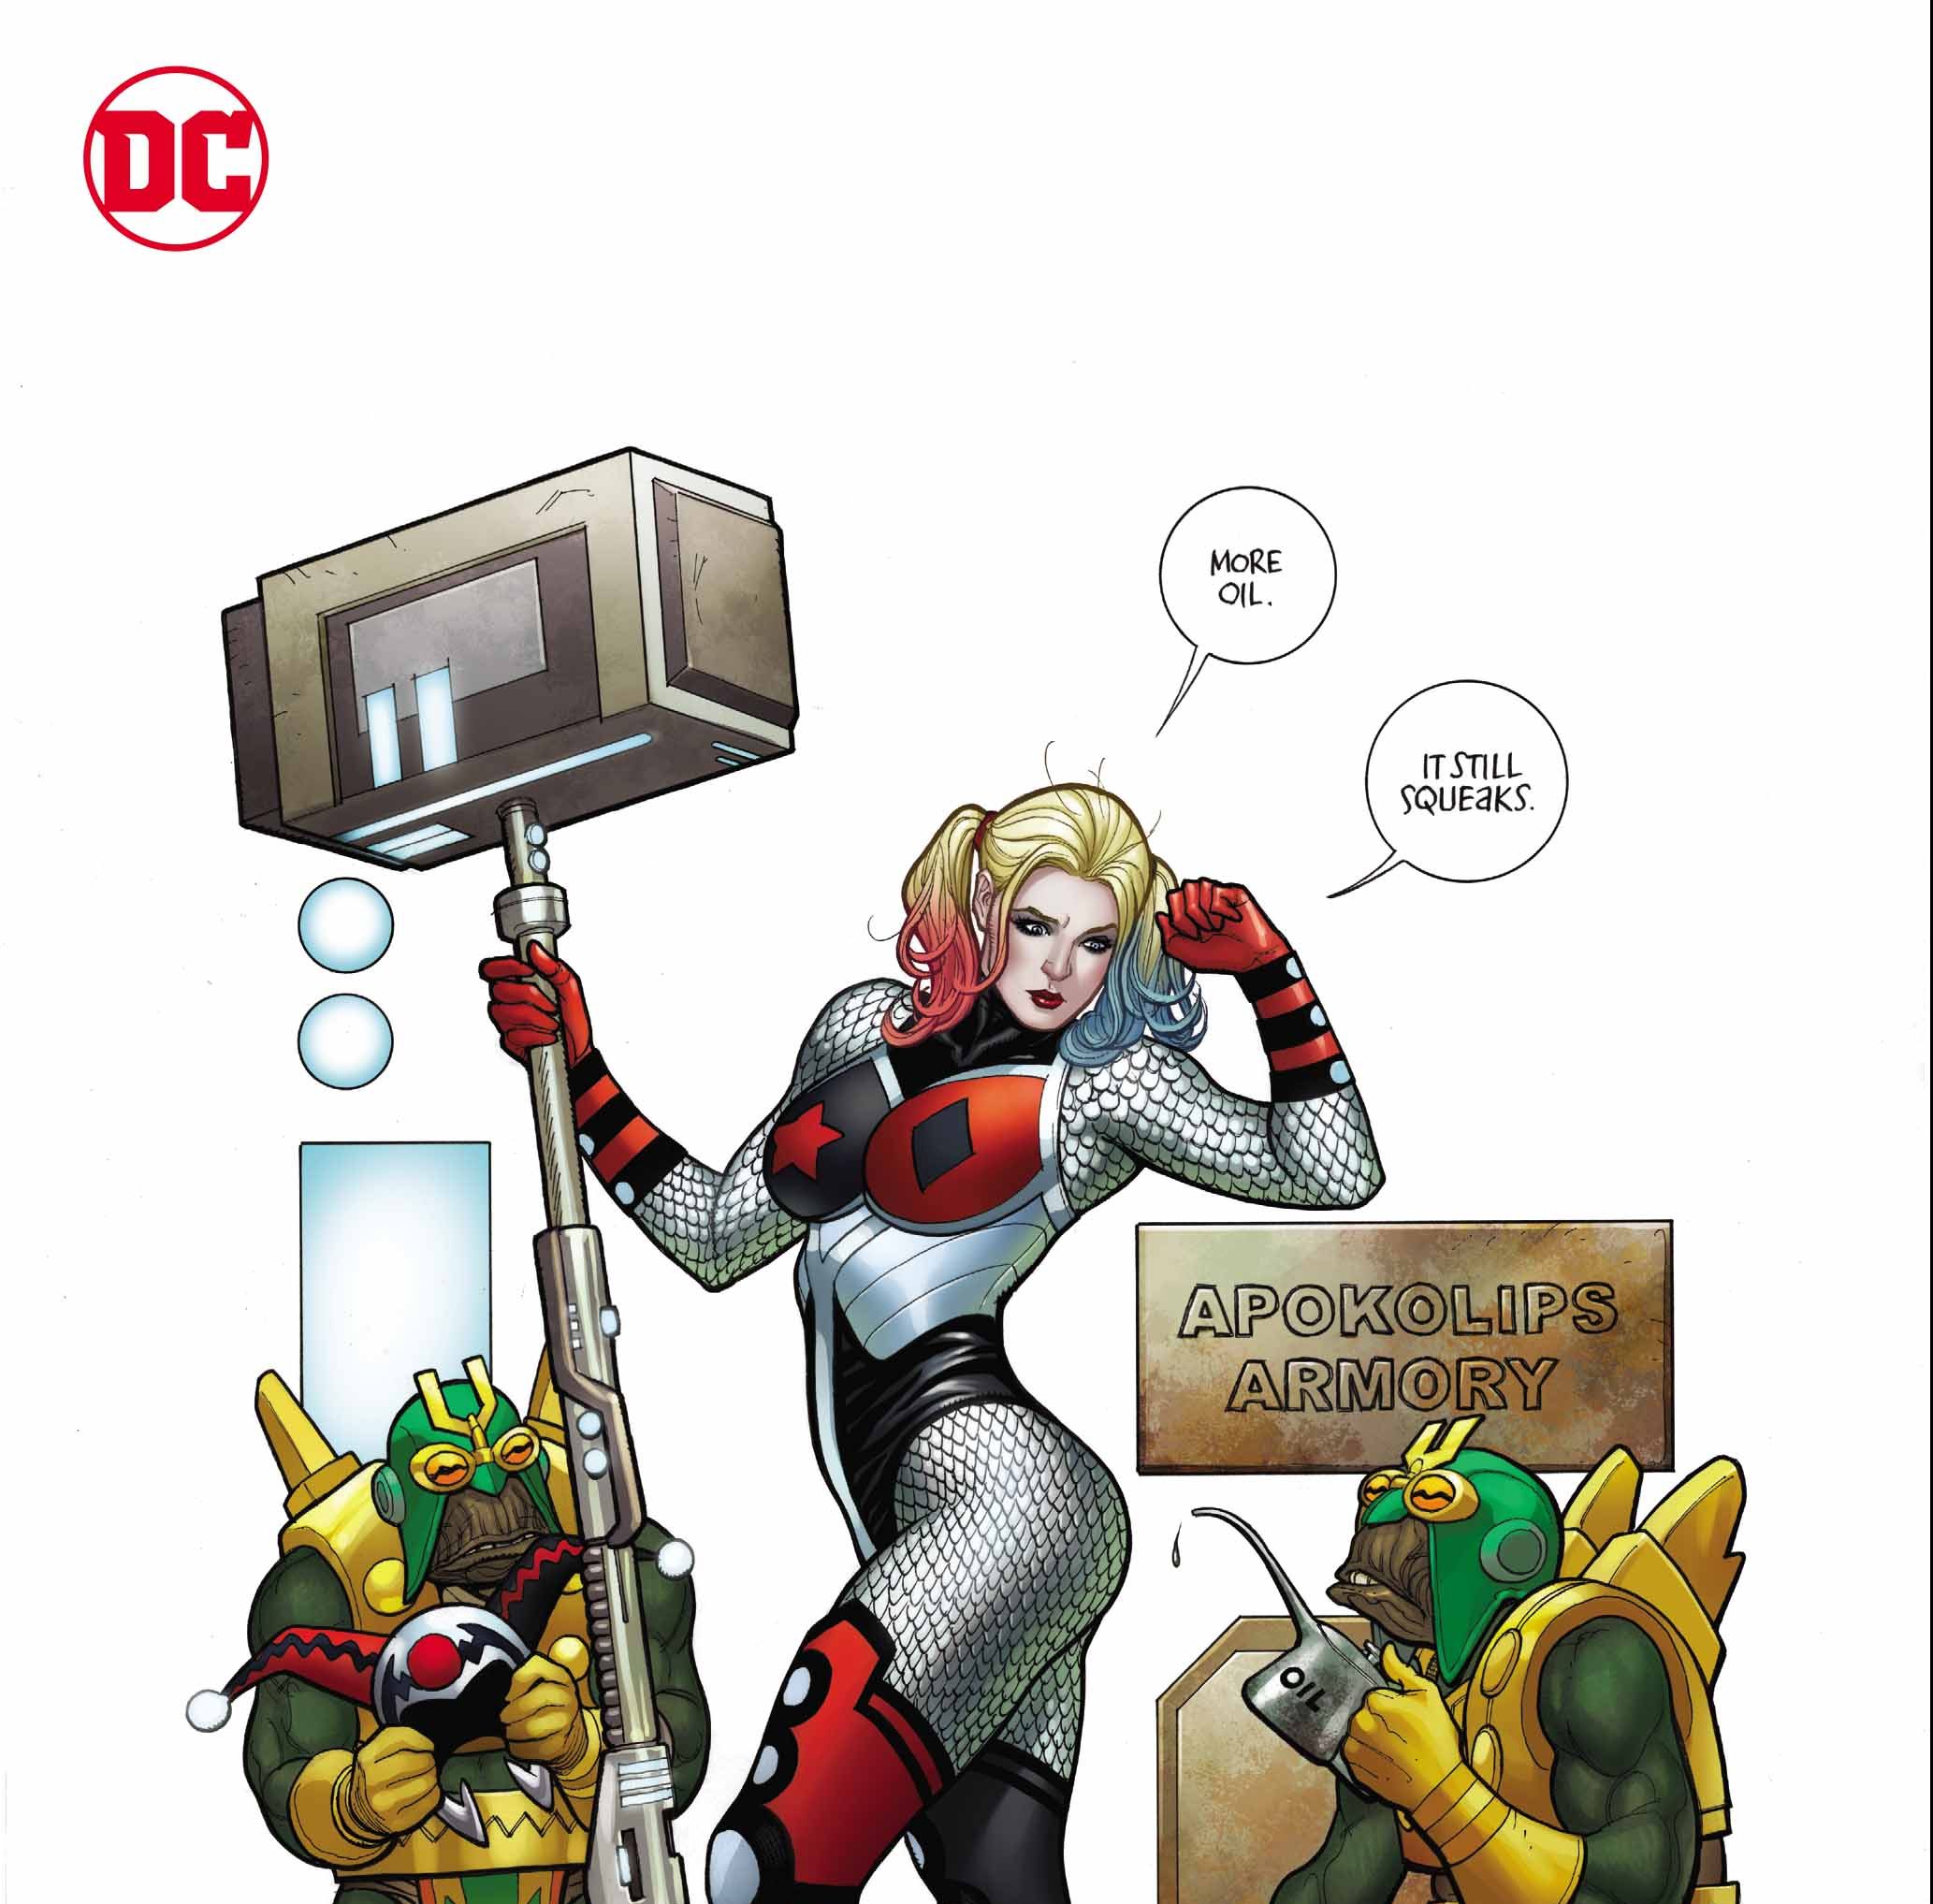 Harley Quinn #45 Review: Welcome to Apokolips